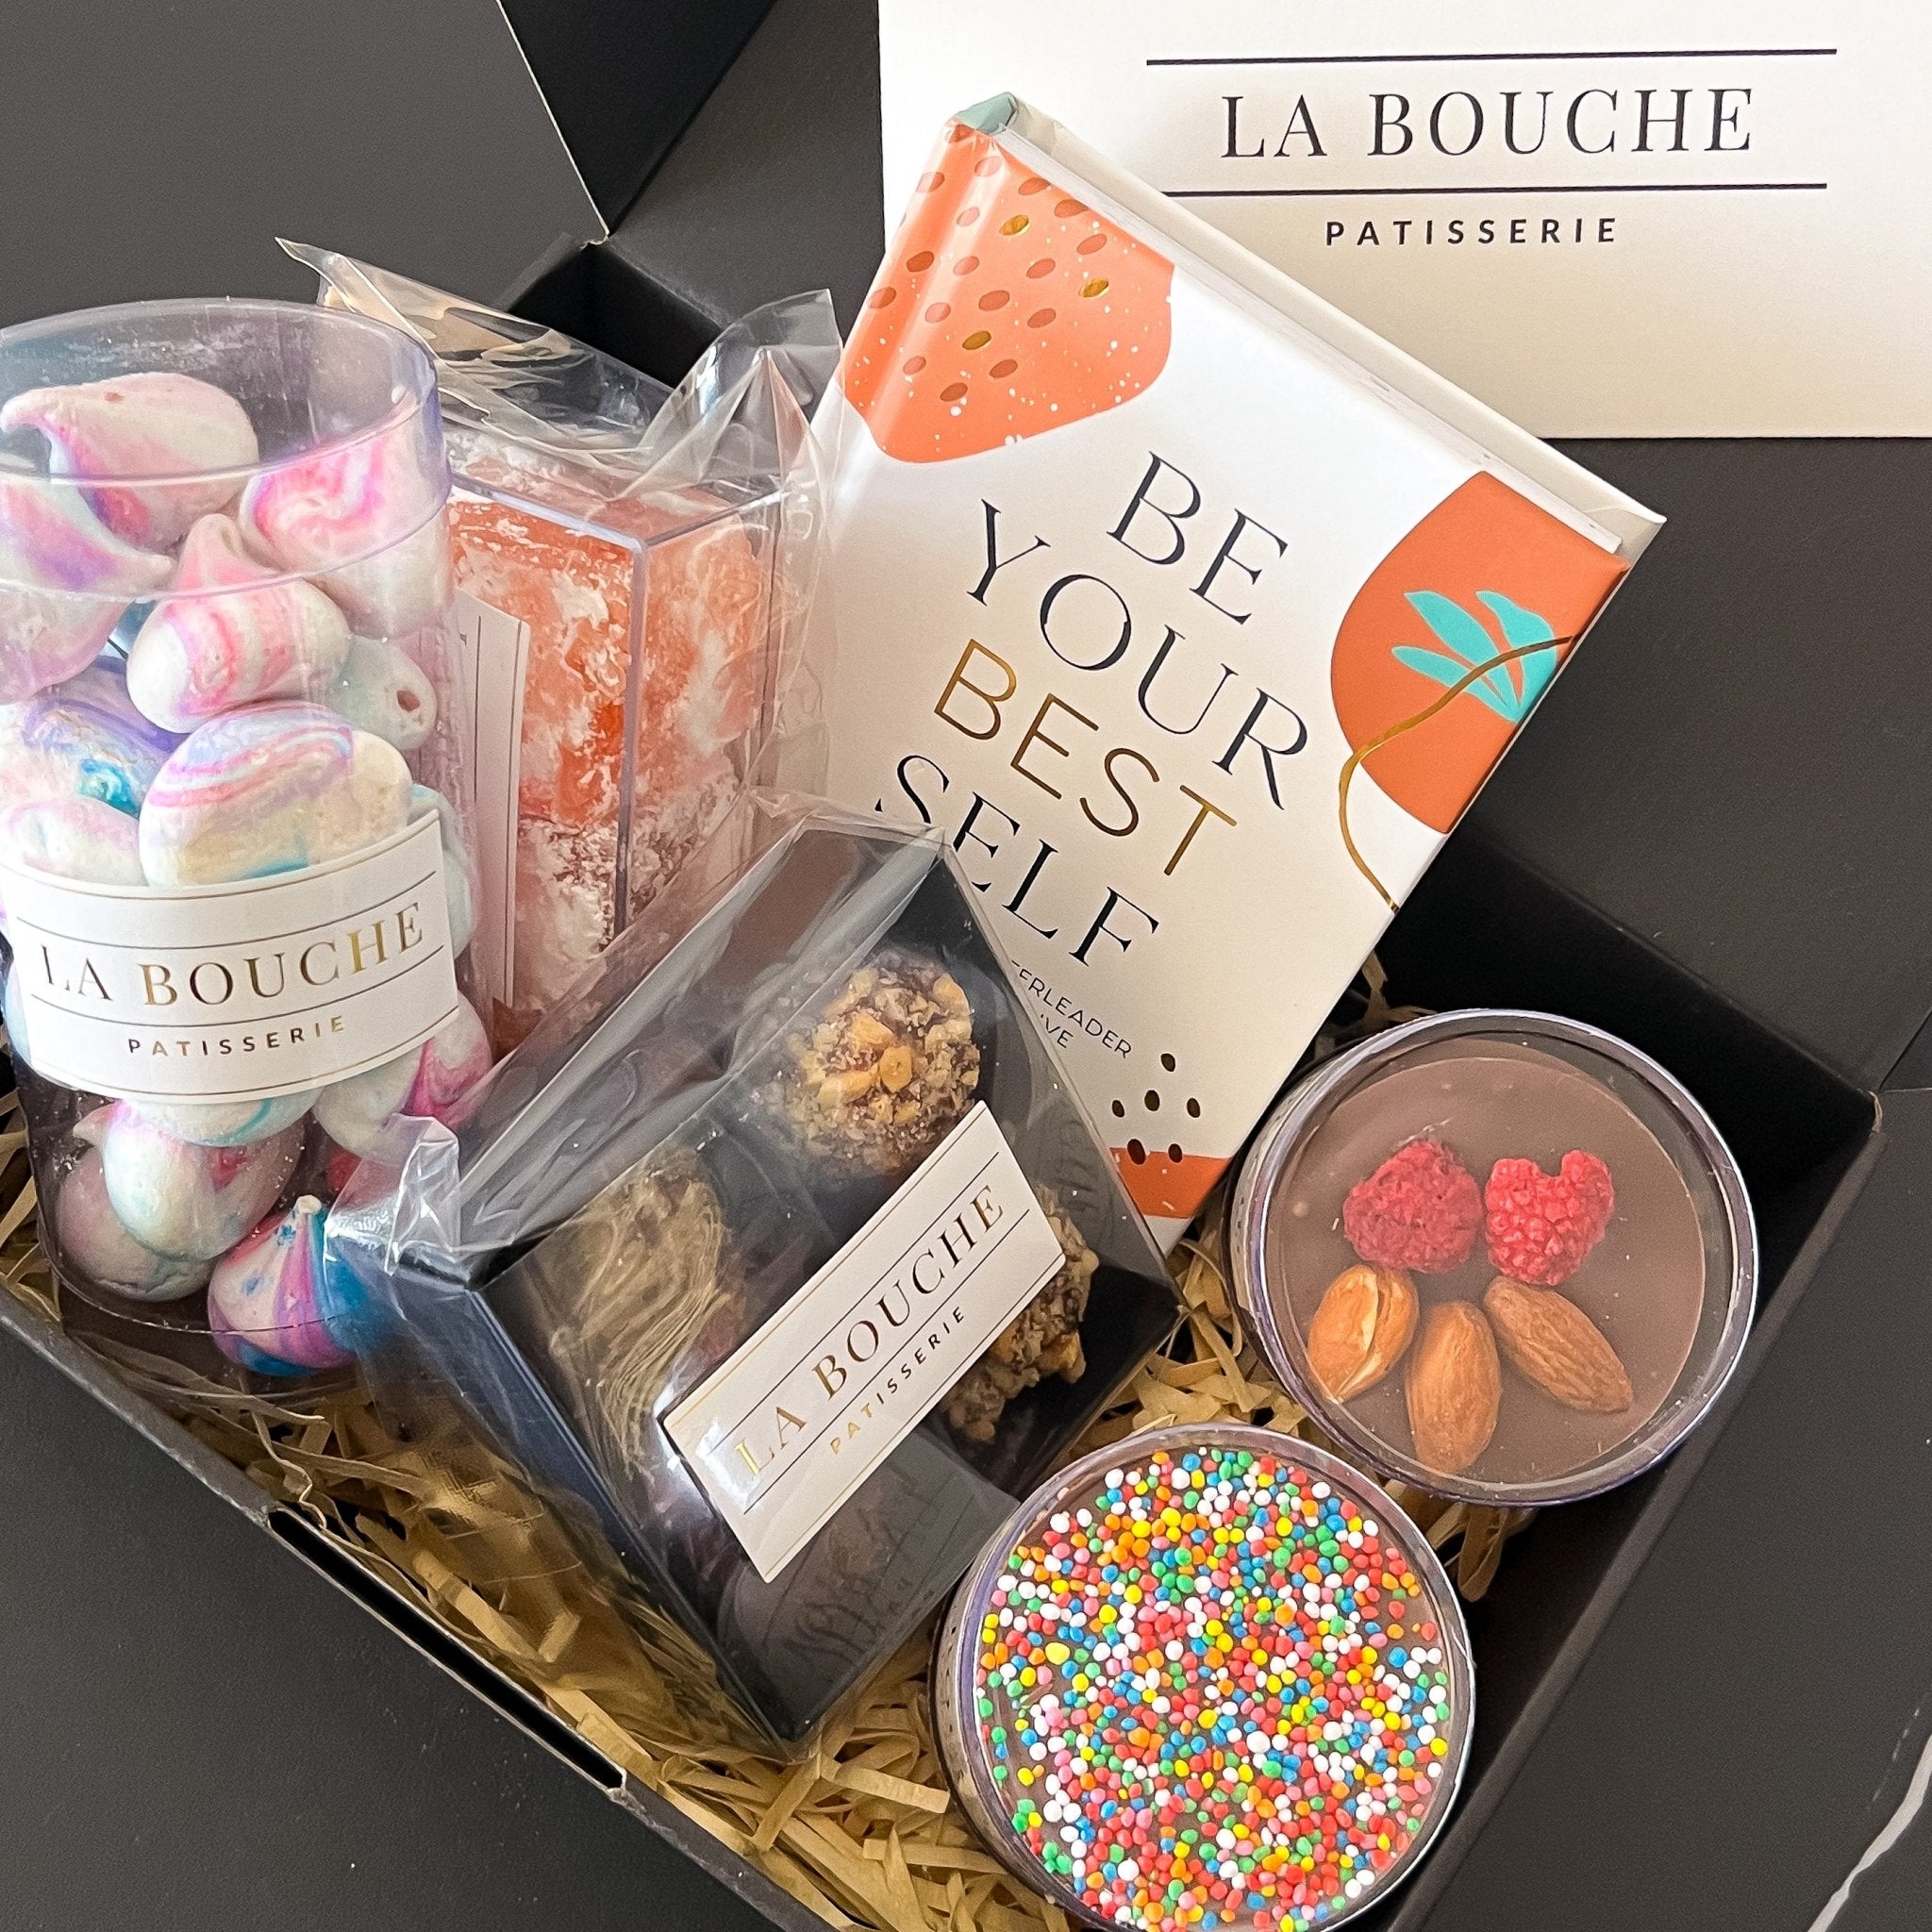 MOTHERS DAY TOUCH OF SWEETNESS - La Bouche